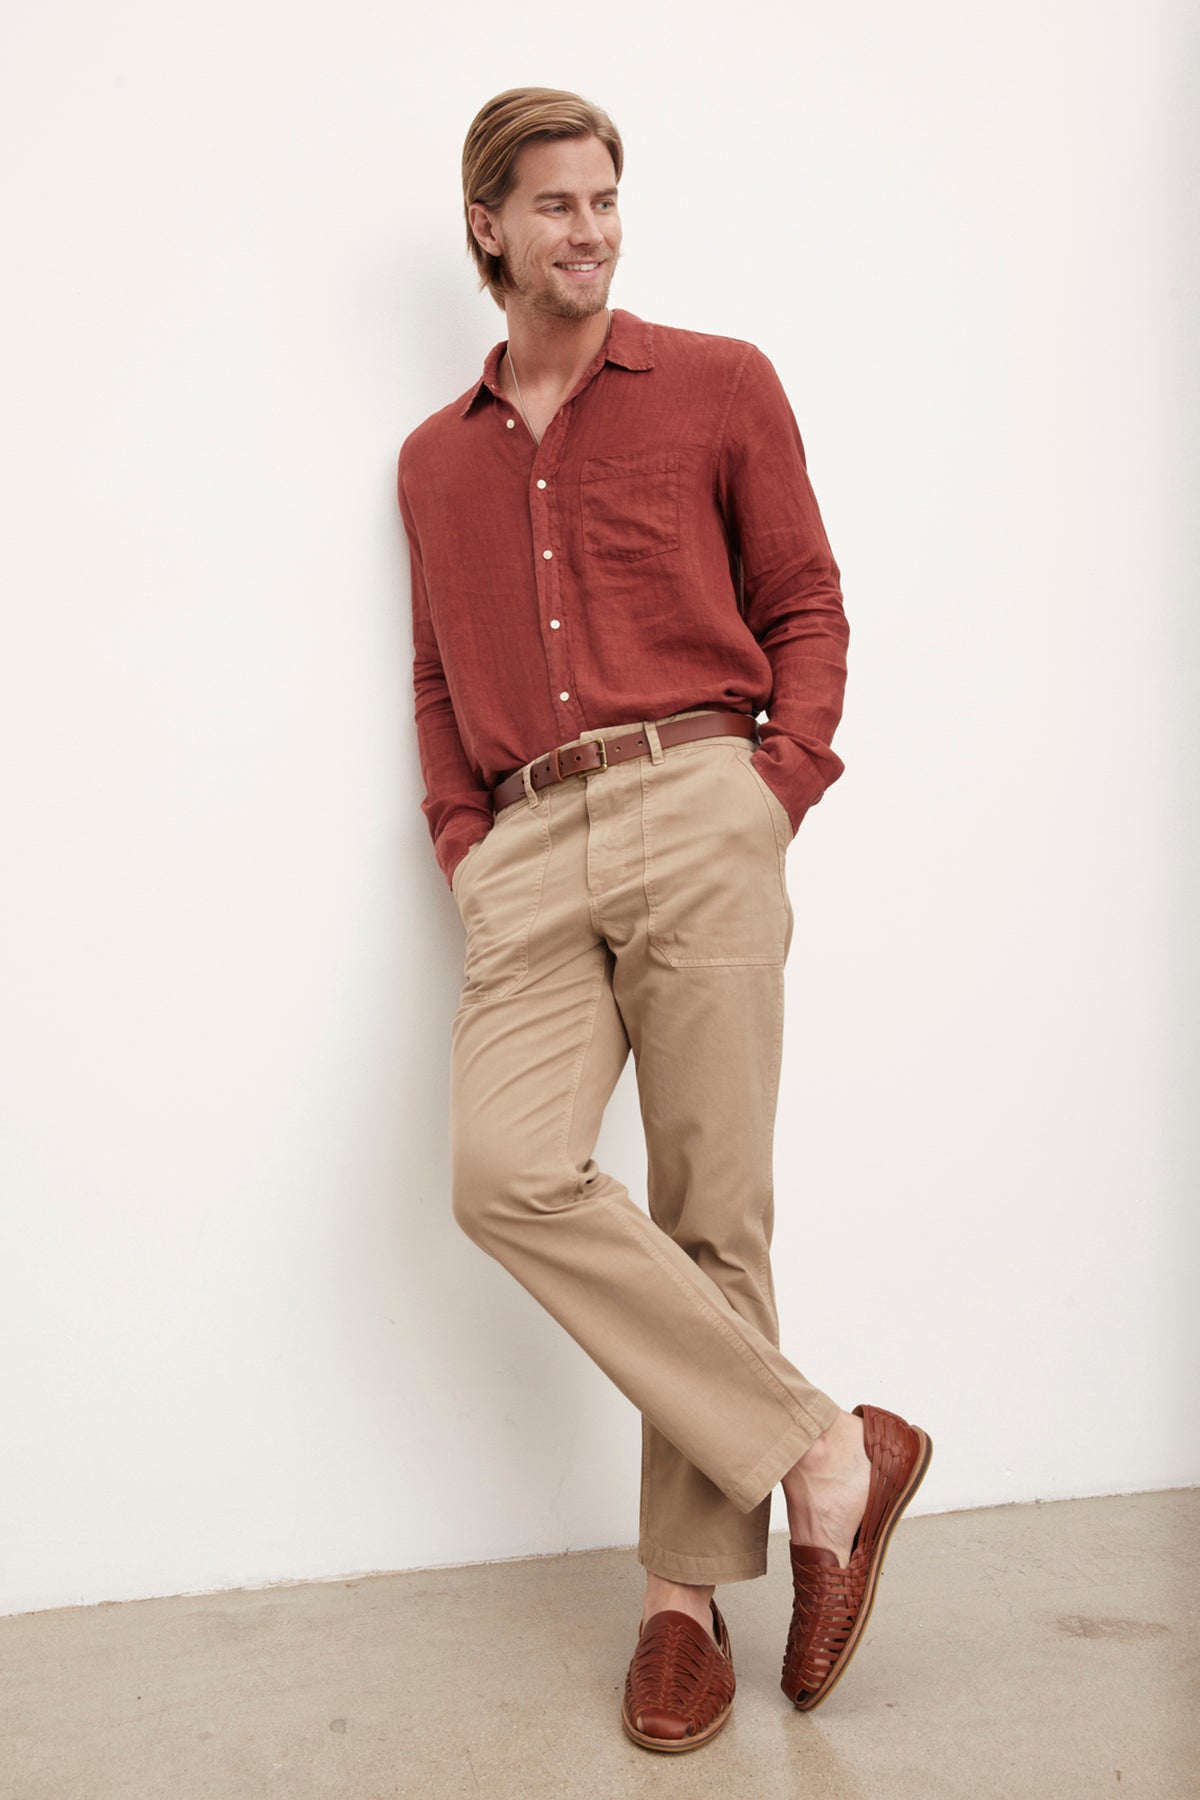   A stylish man wearing a Velvet by Graham & Spencer BENTON LINEN BUTTON-UP SHIRT and khaki pants leaning against a wall. 